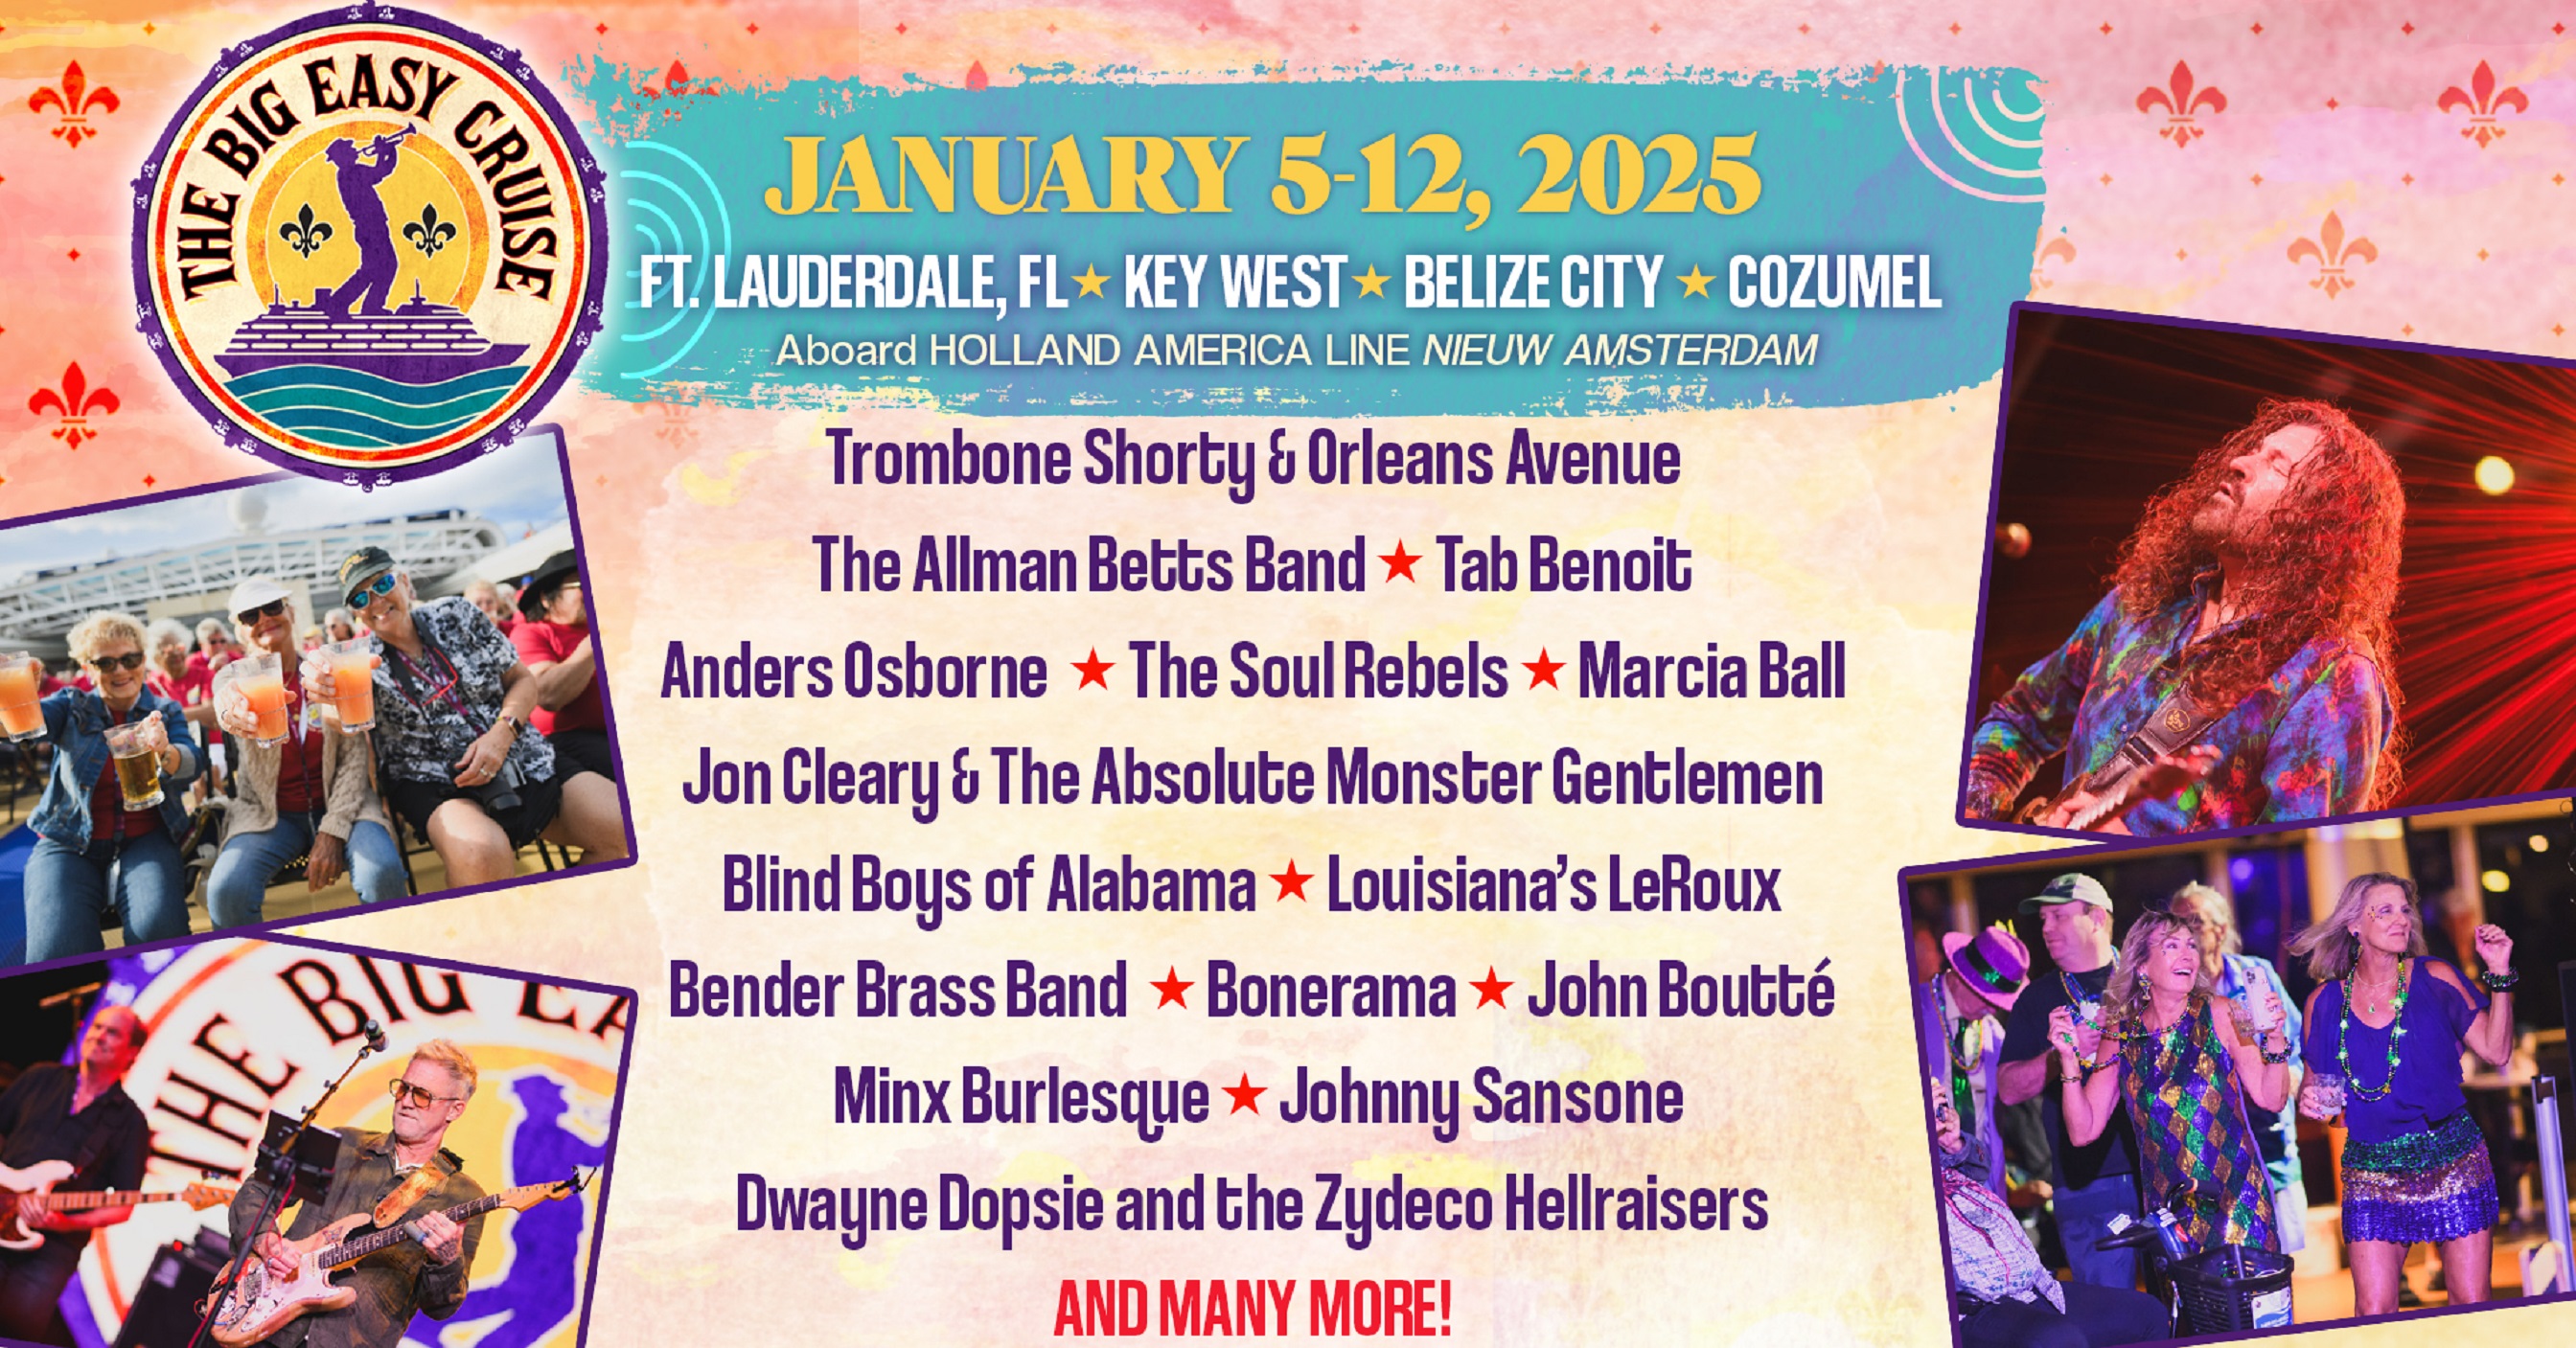 The 2025 Big Easy Cruise Adds New Artists To Stellar Line-Up, Including Keb’ Mo’, St. Paul & The Broken Bones And Much More